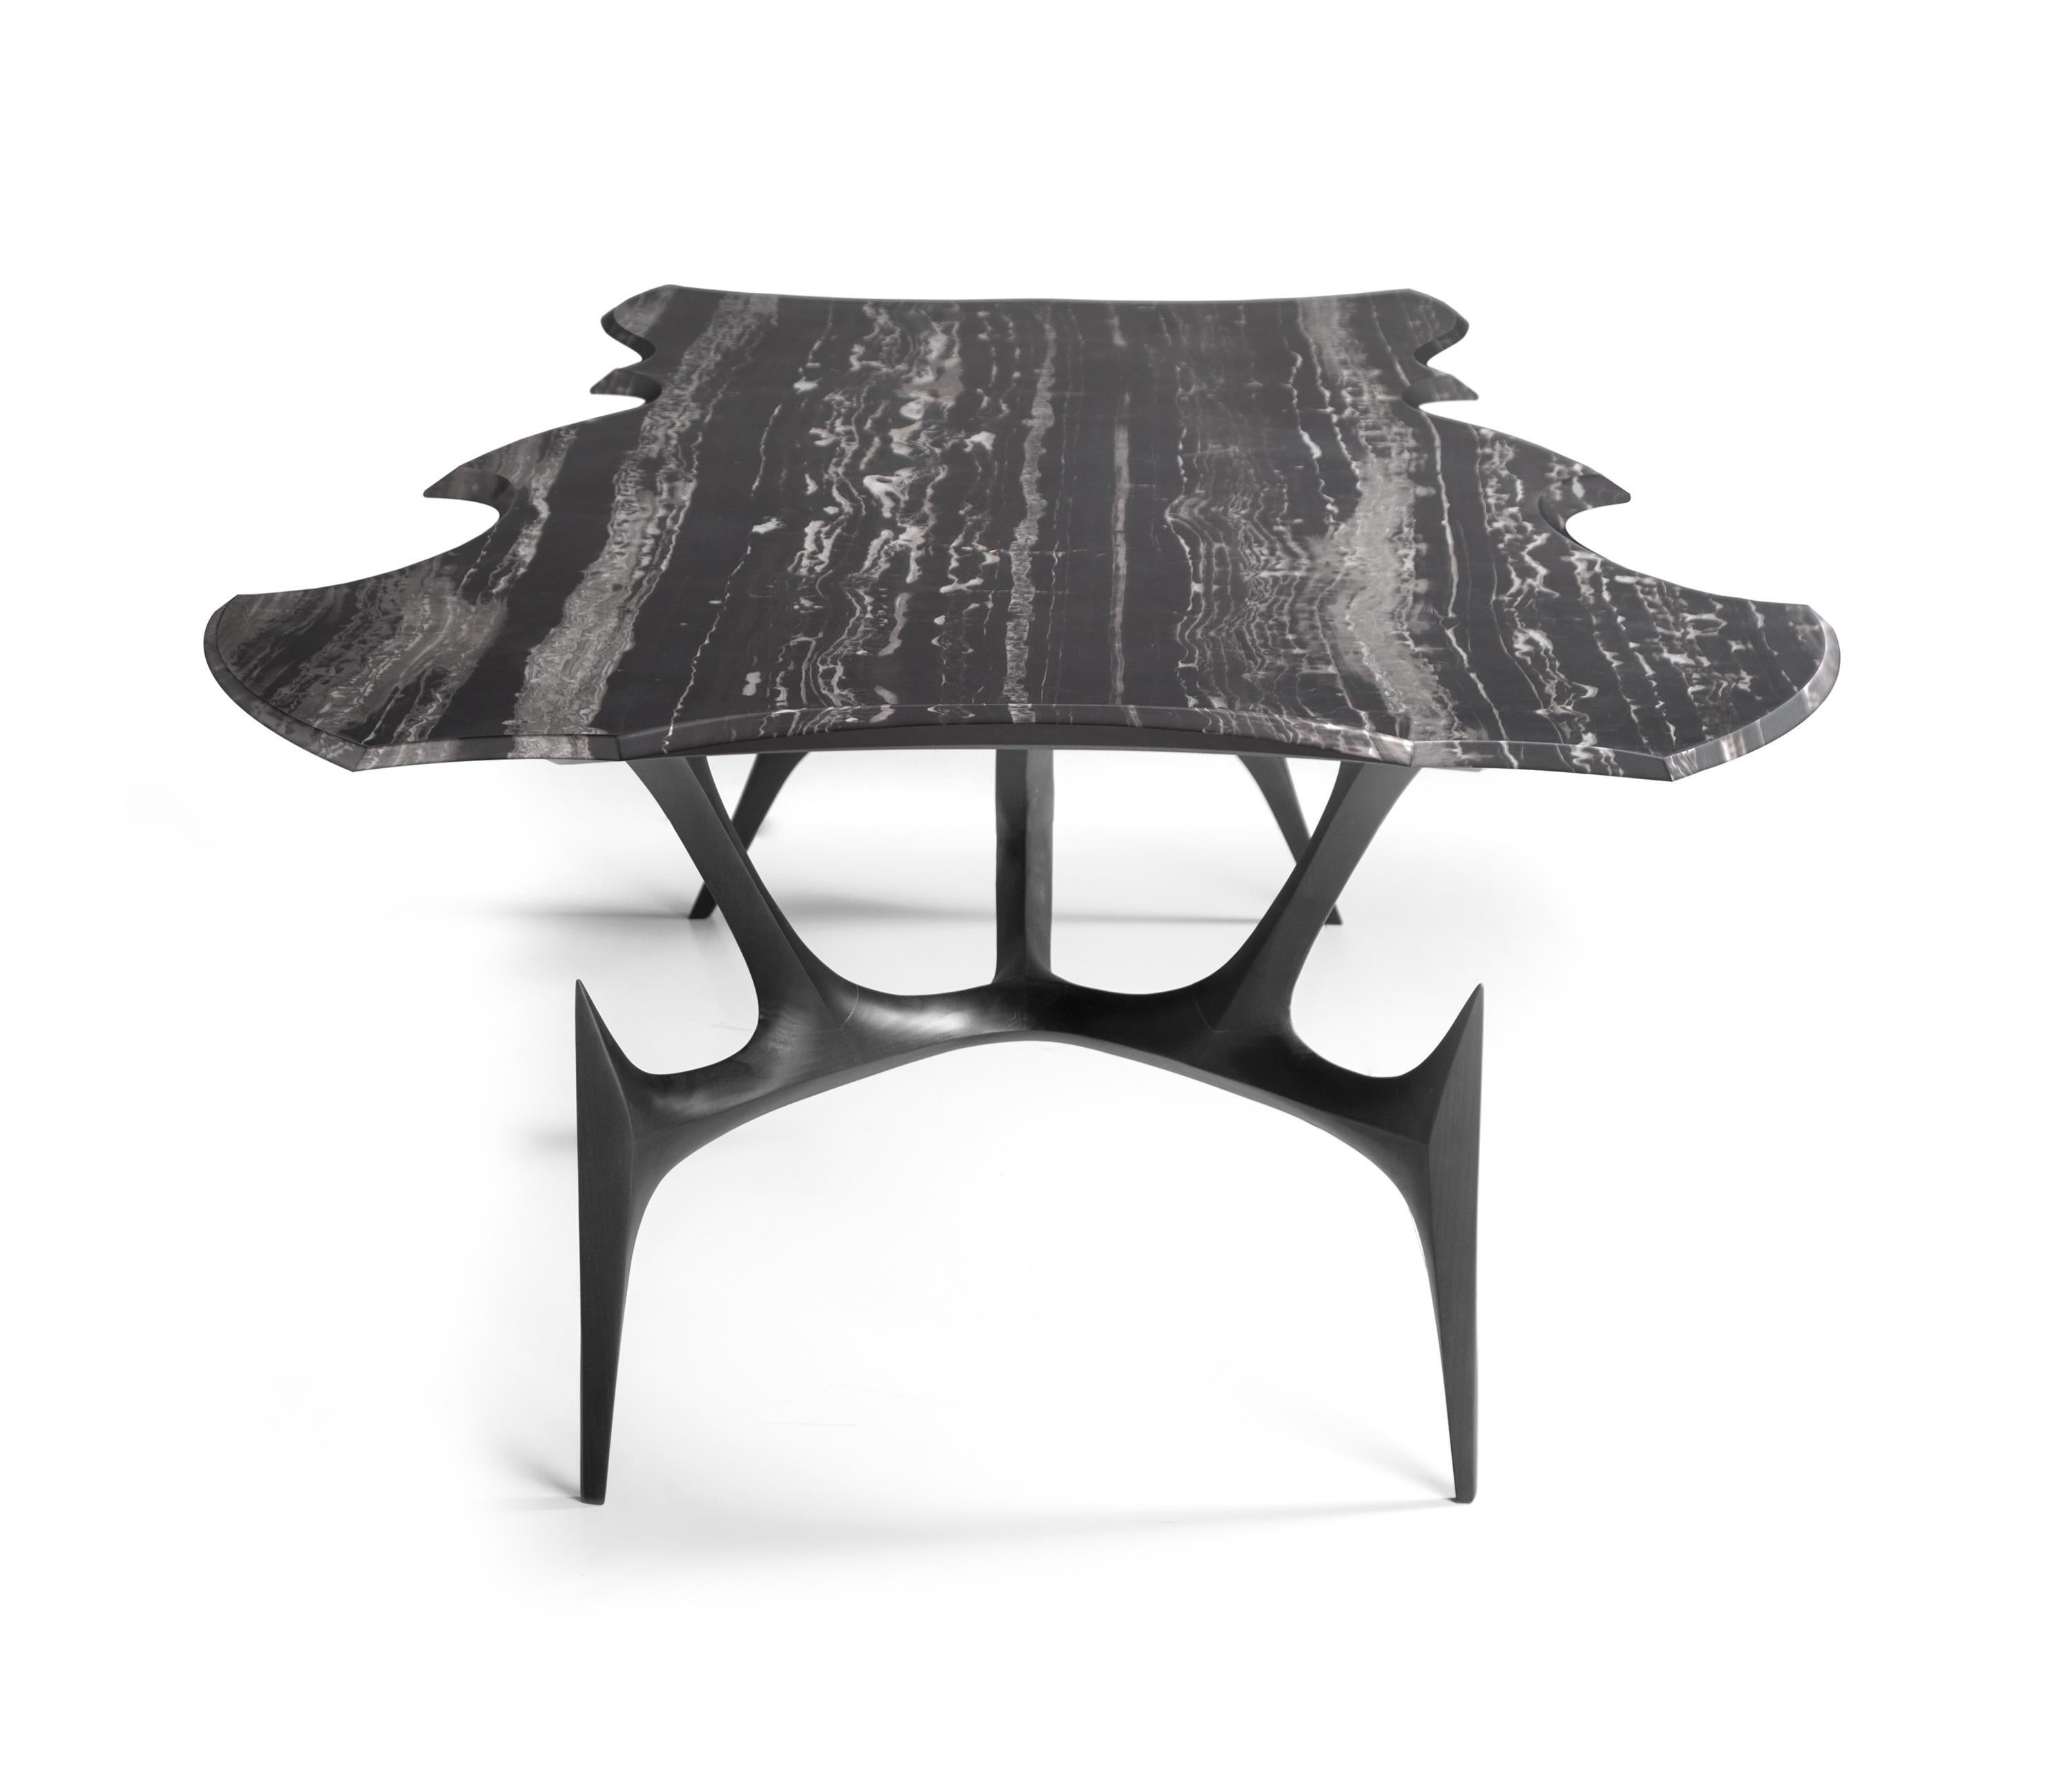 Spanish Limited Edition Dining Table Made To Order With American Walnut & Marble